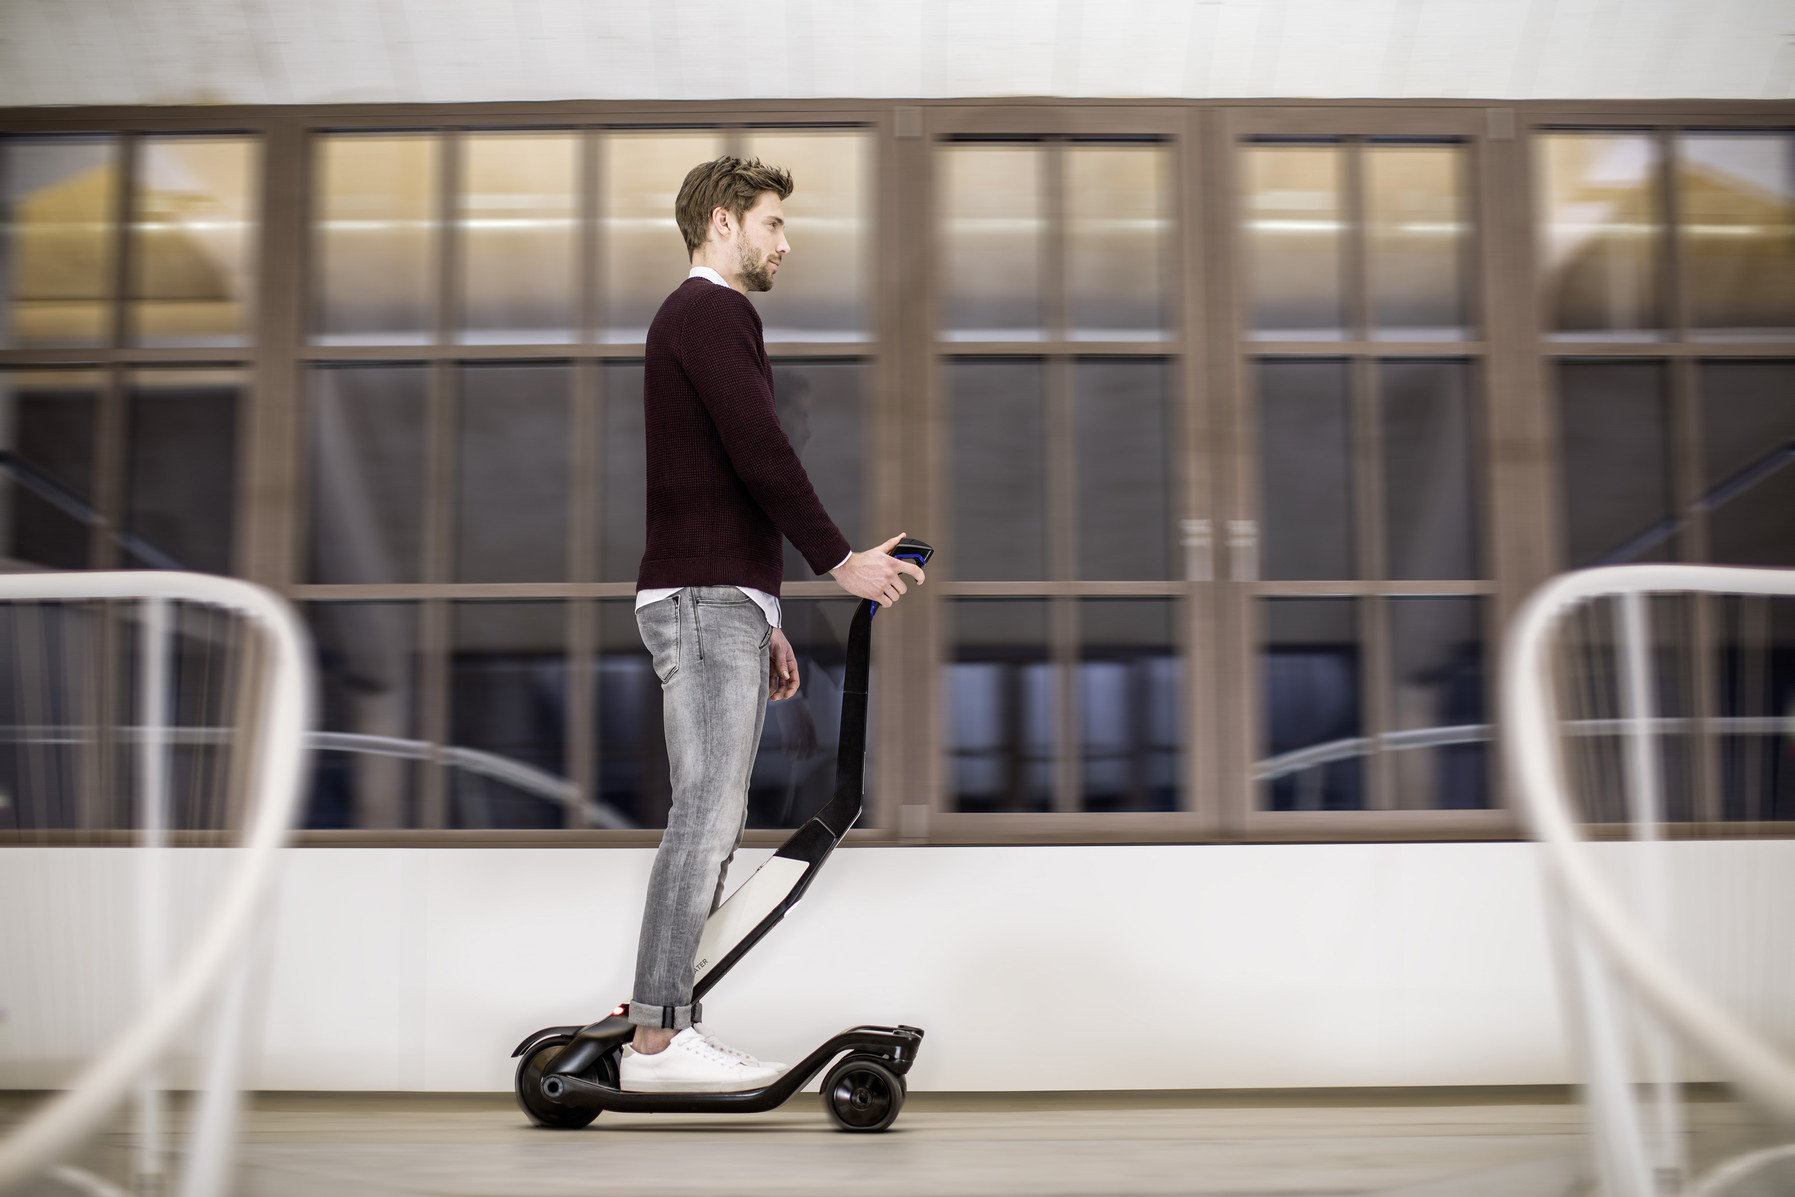 volkswagen offers two cool scooter designs for zipping around town die neue studie cityskater